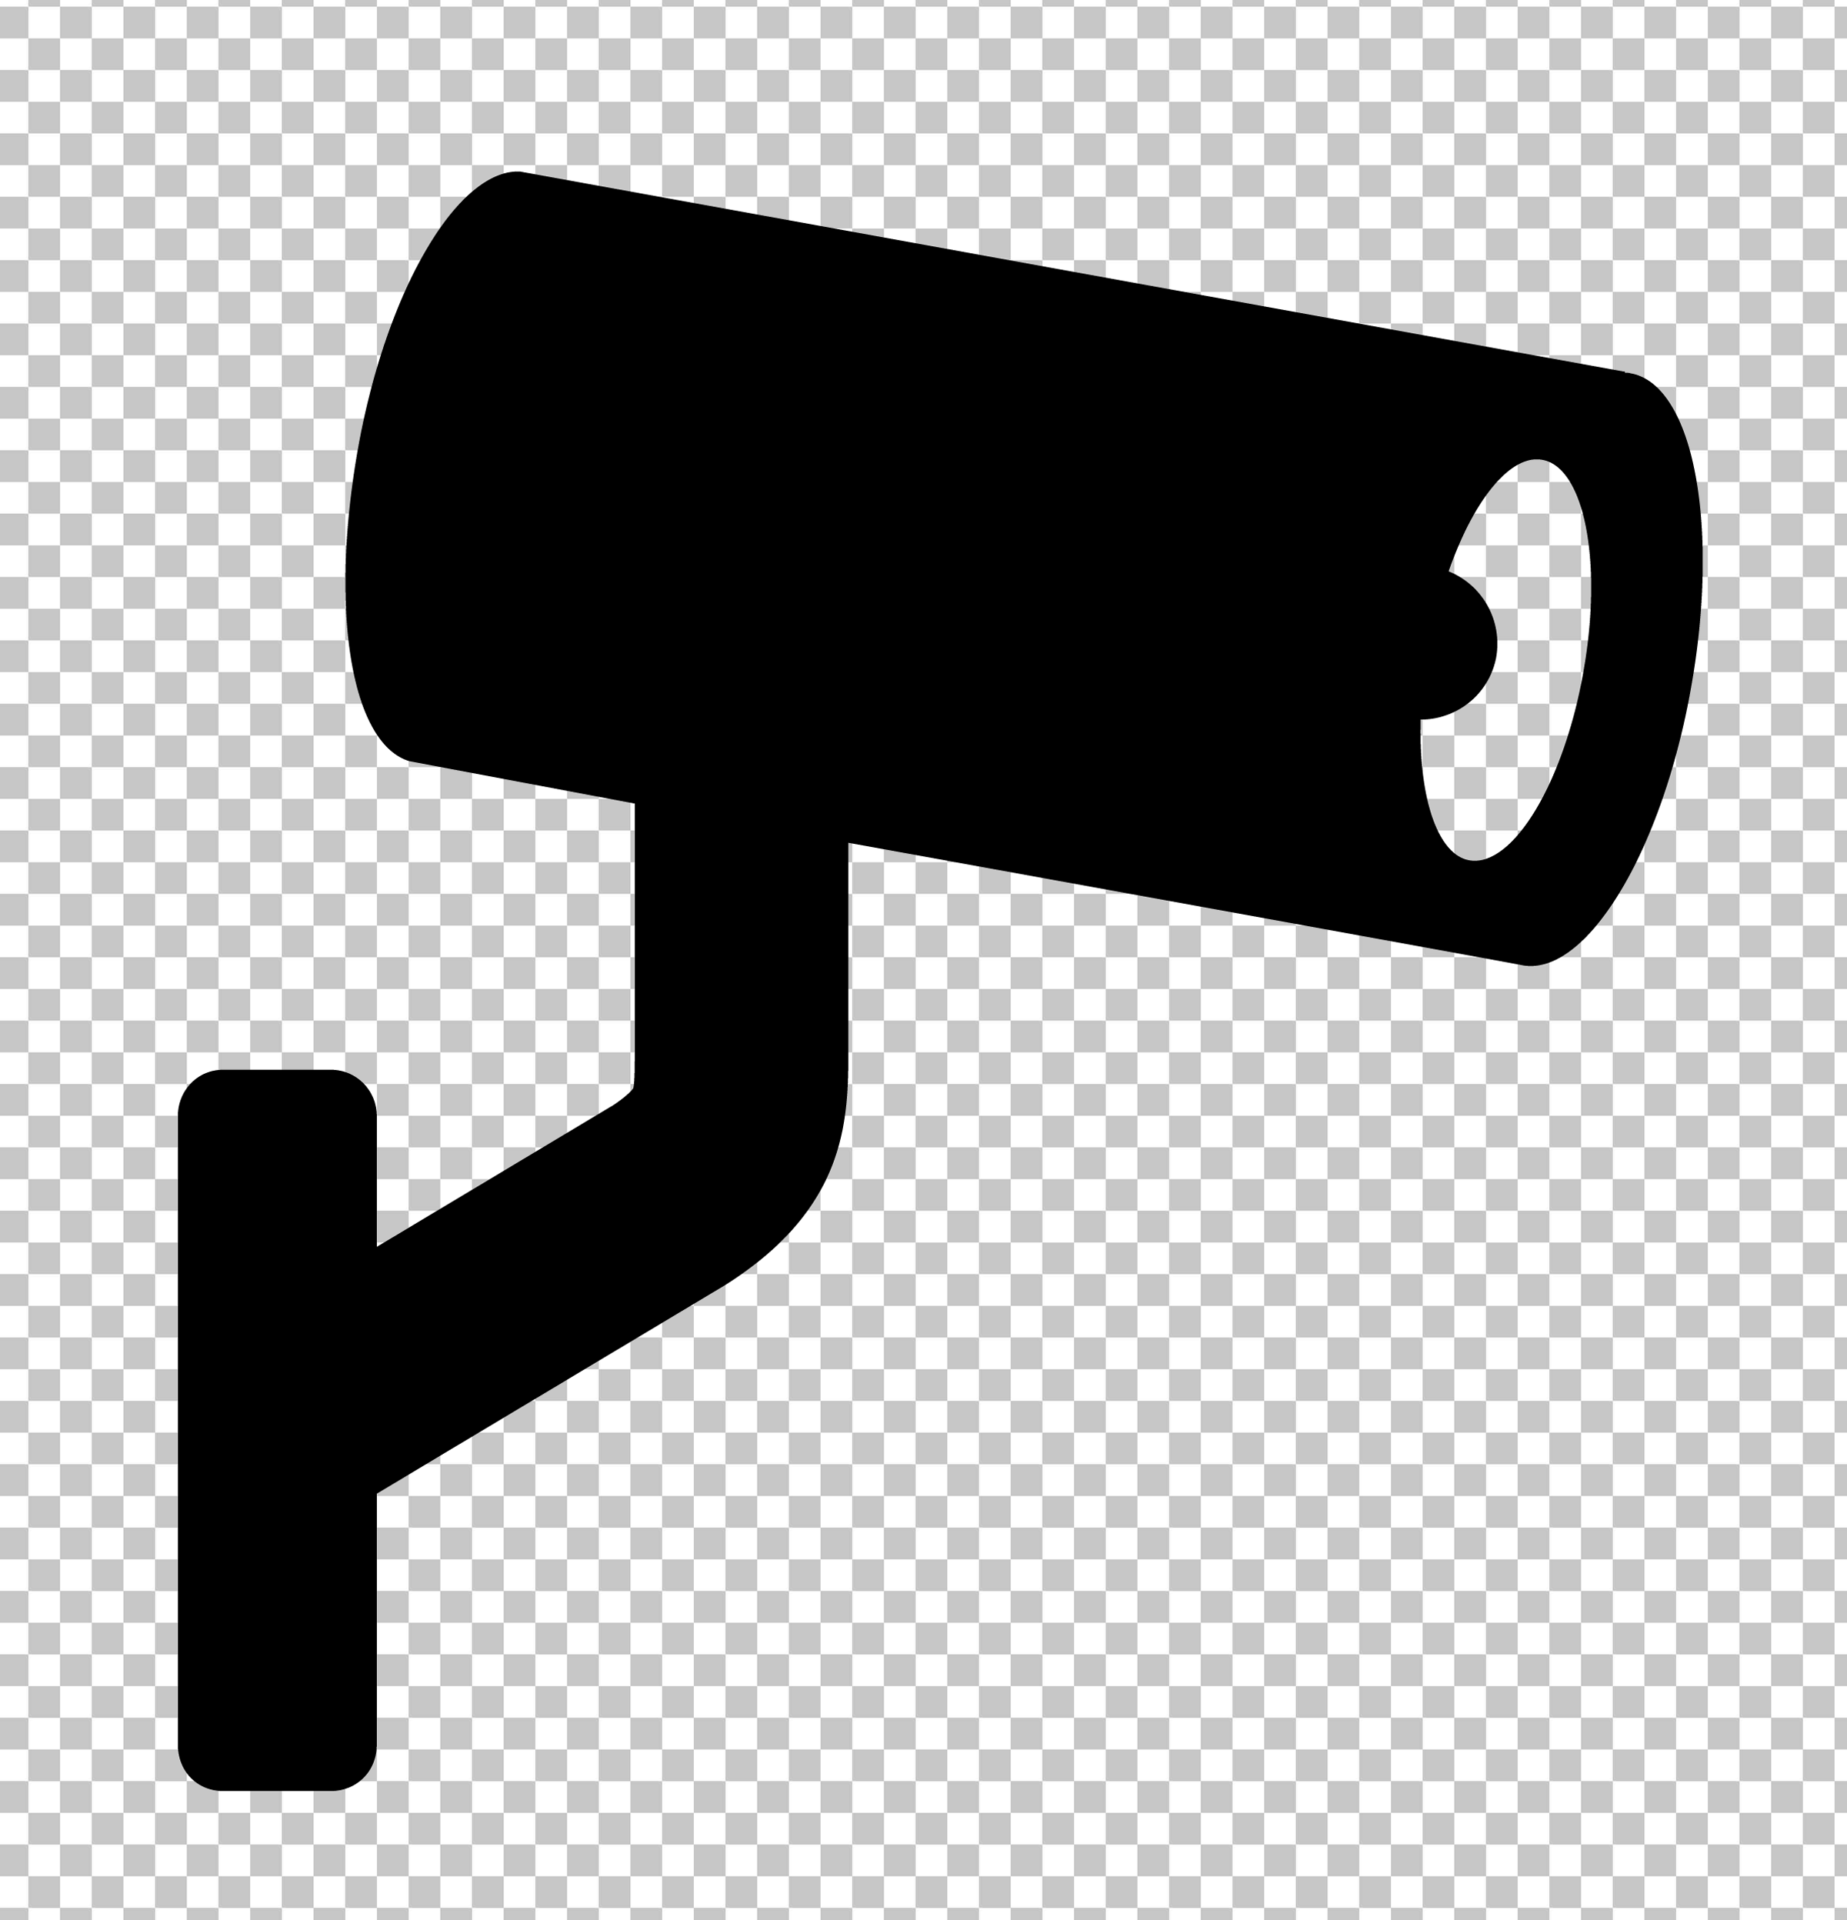 Black Security Camera Icon PNG Image